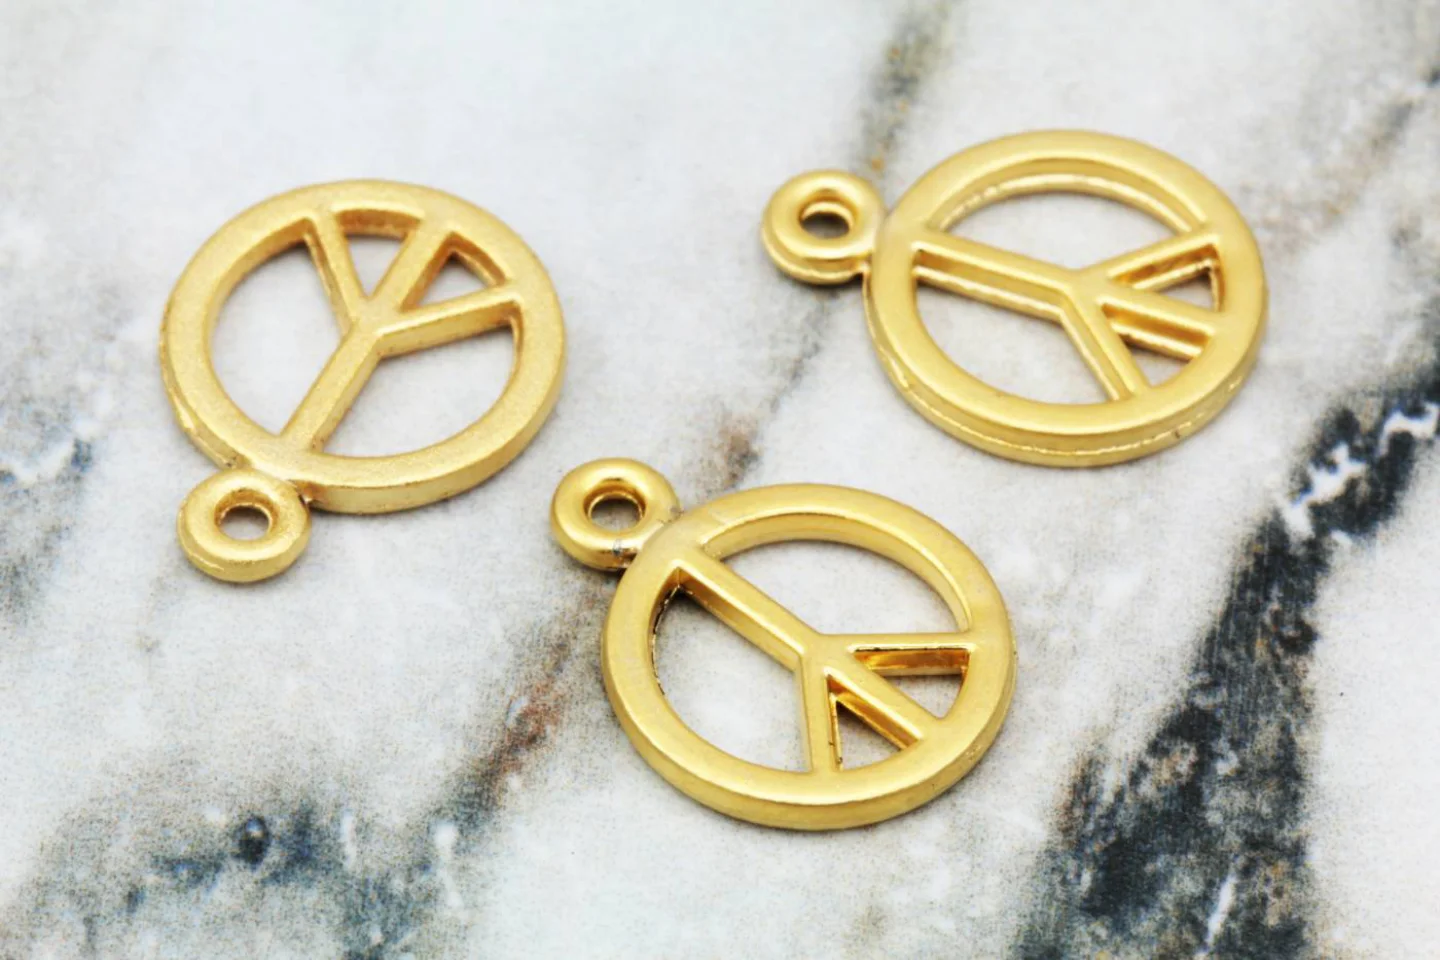 gold-plated-peace-sign-metal-pendants.